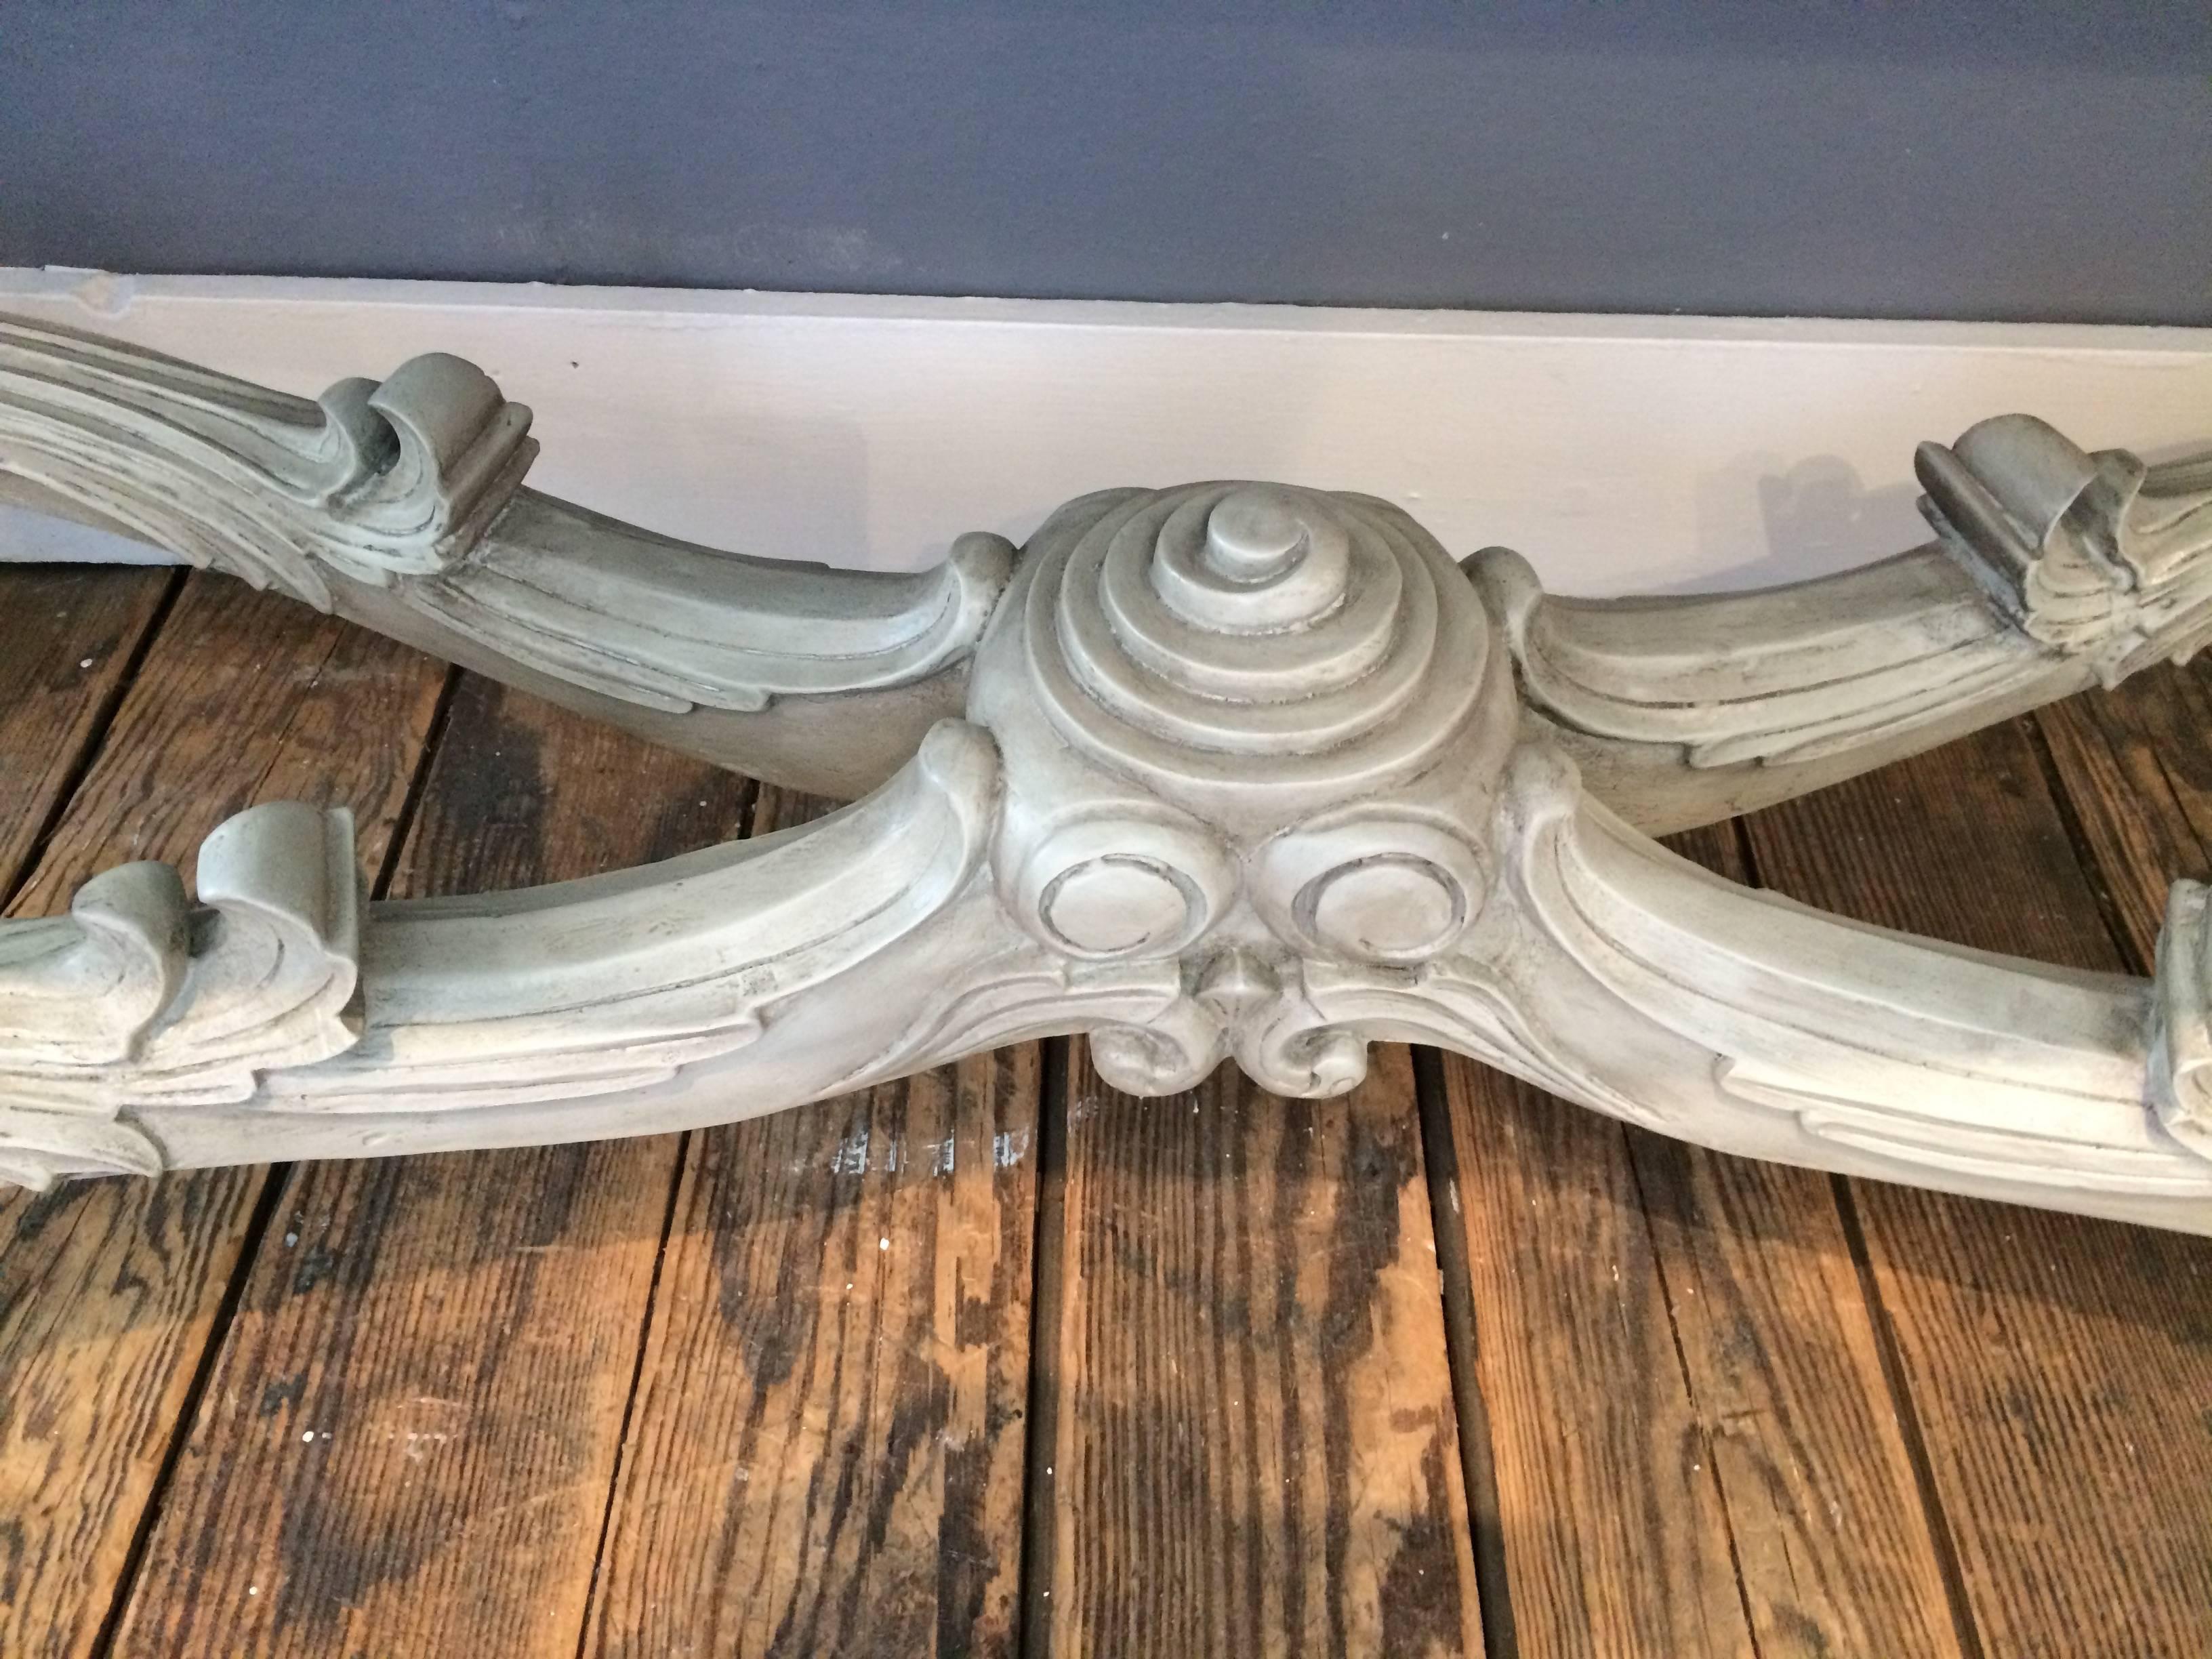 Stylish contemporary console made by Oly Studio with a romantic ornately hand-carved grey painted base with intricate scroll motifs, and an aged mirror top.

SC